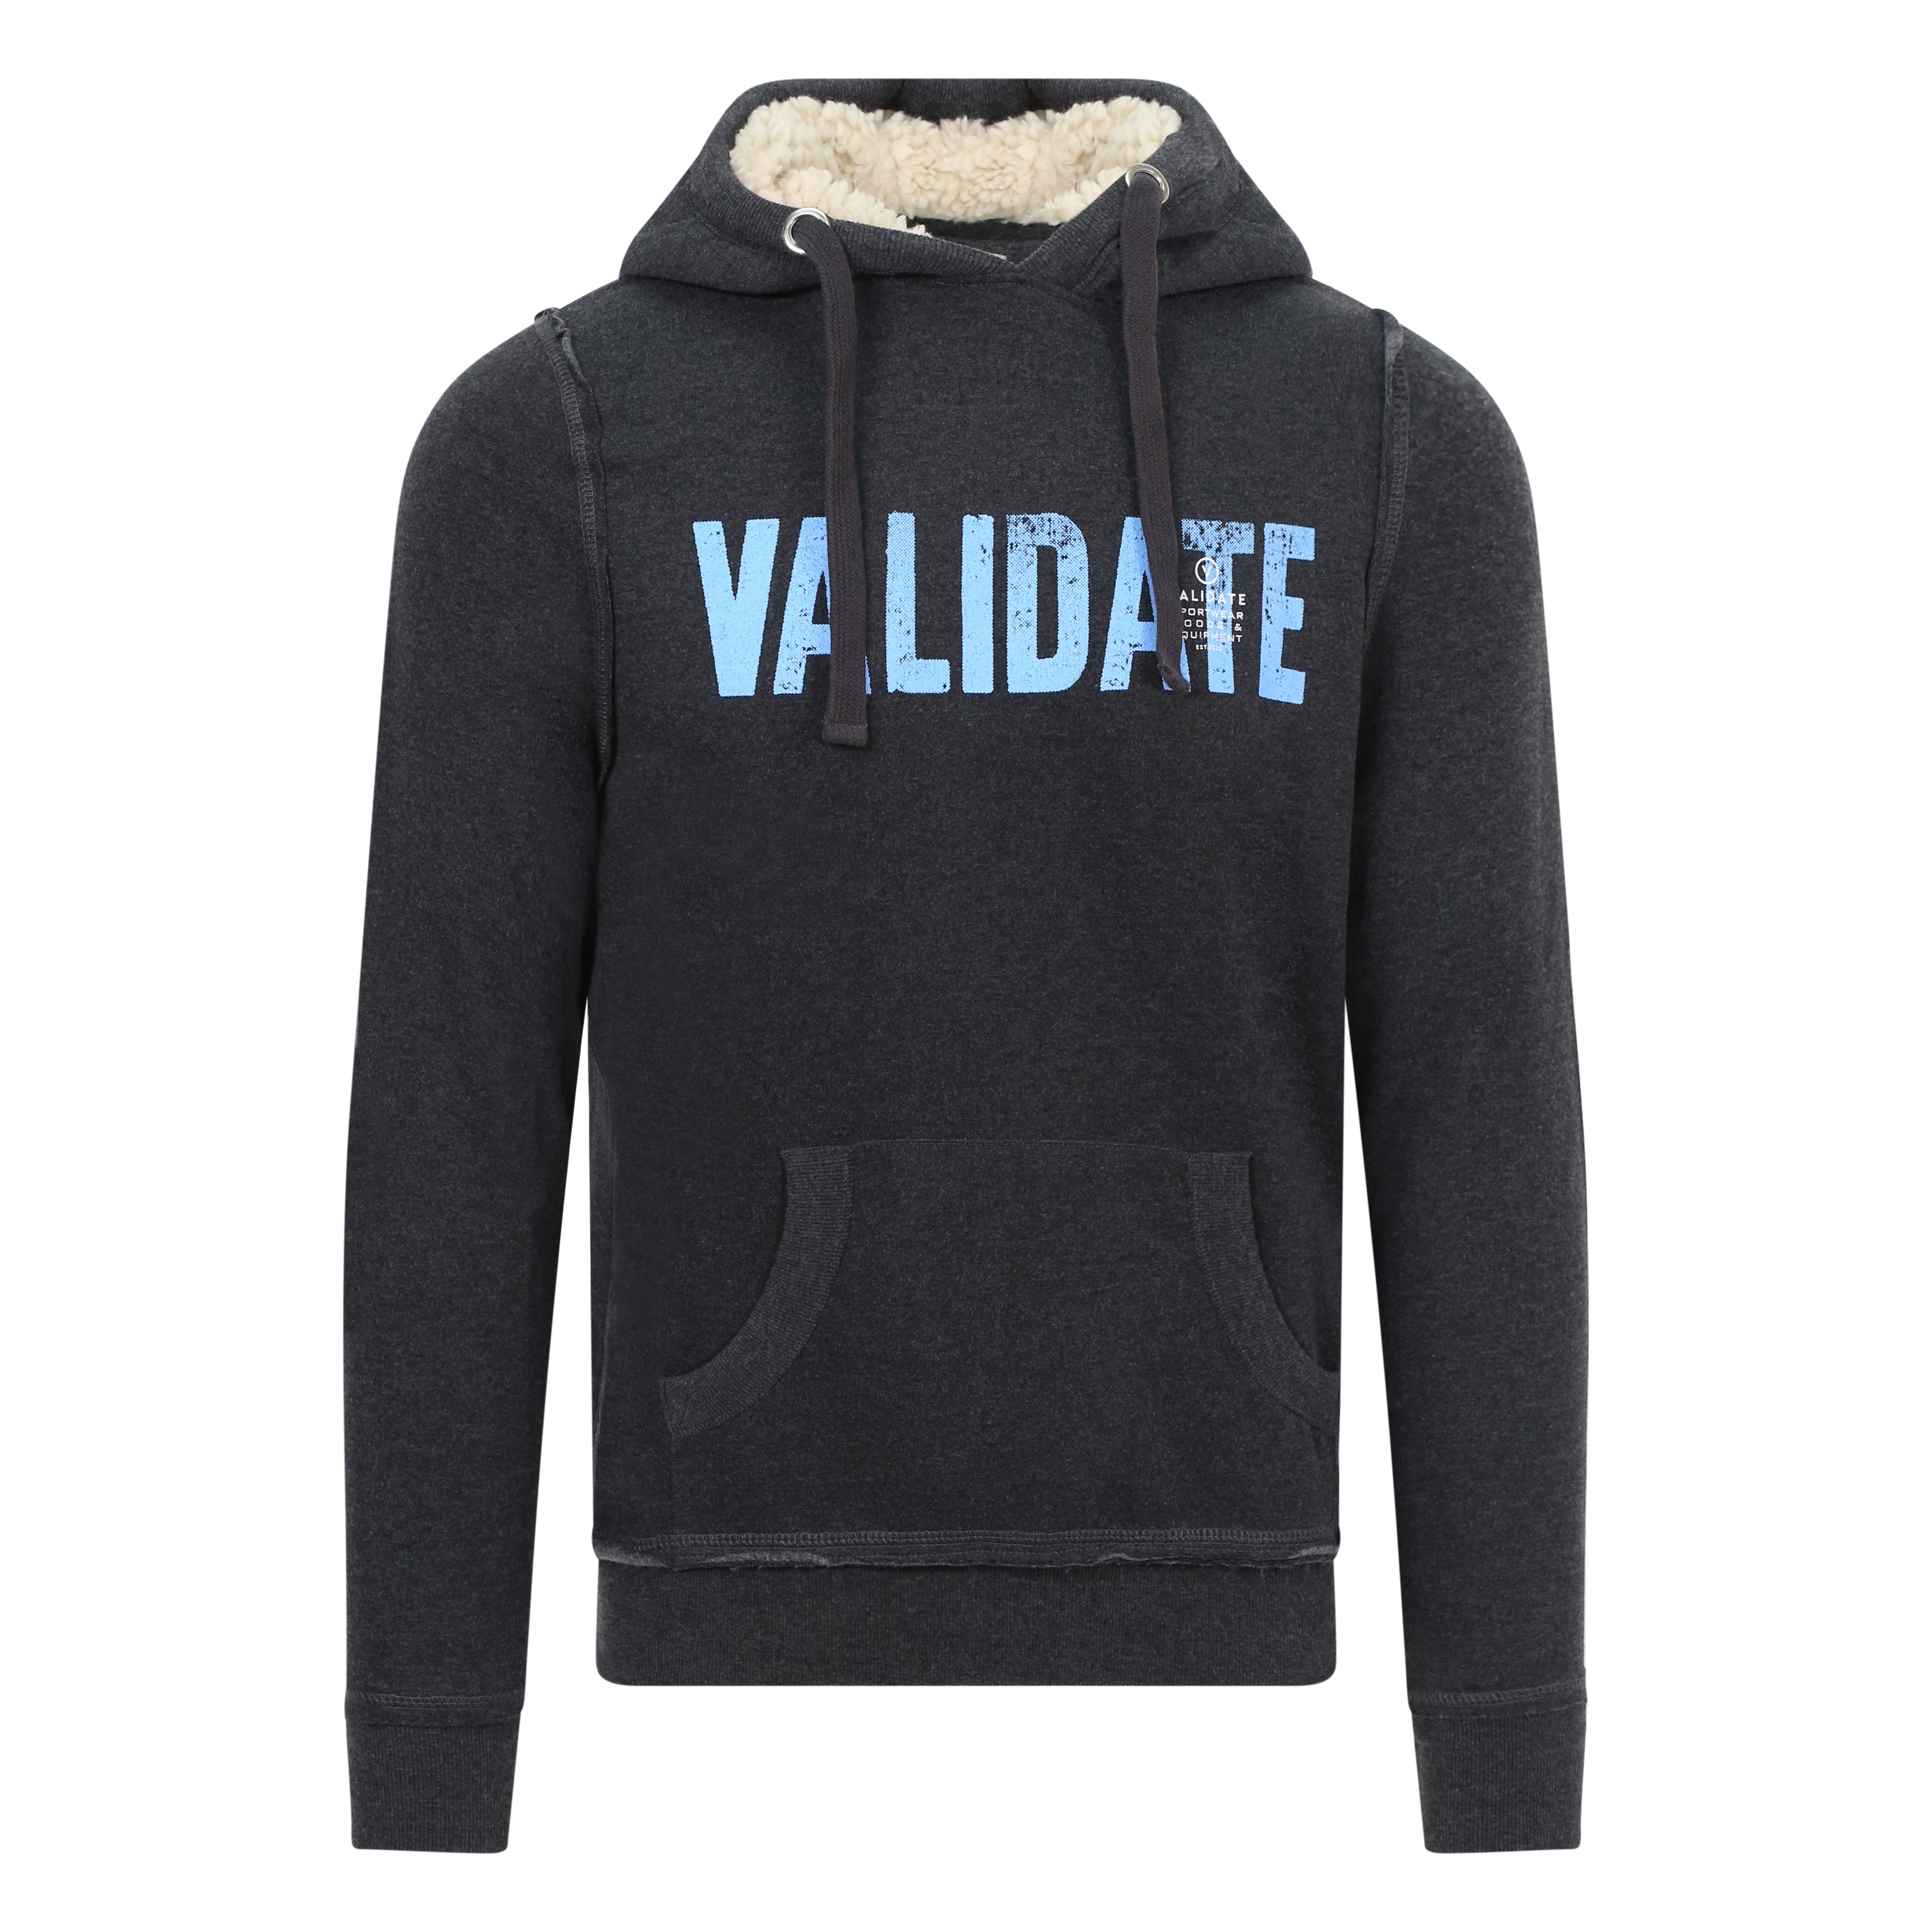 Validate Women's Text Charcoal Hoody